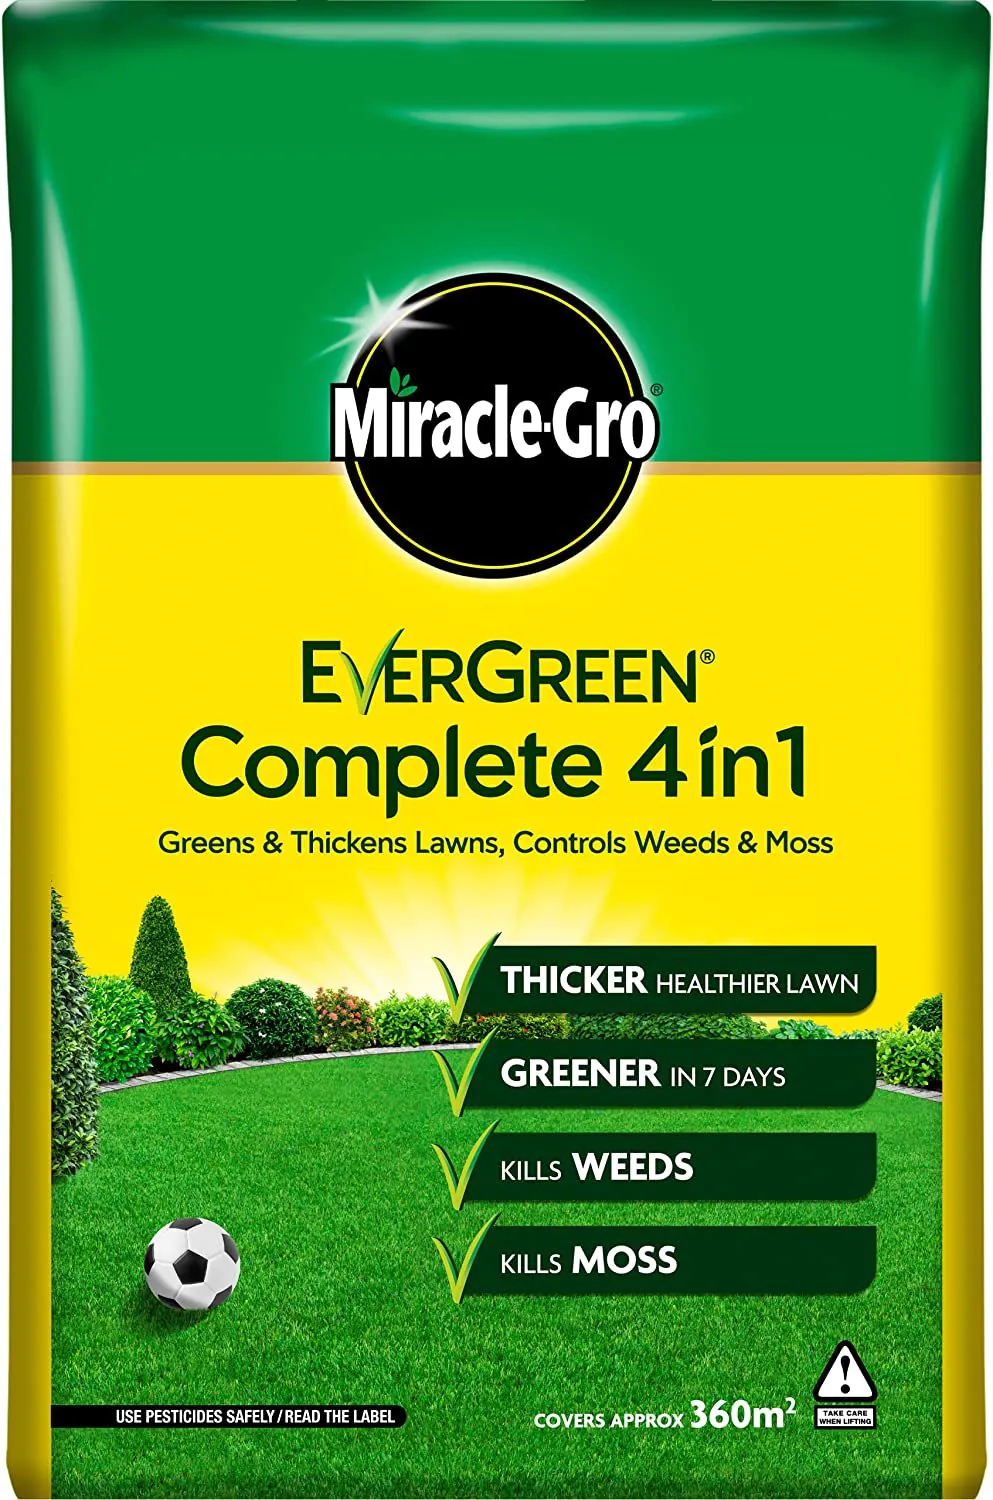 A1 Lawn - Multi Purpose Grass Seed, 10kg (280m2) - Fast Growing UK Quality, Fresh, Pet & Child Friendly - Ideal for Patch Repair, Over Seeding, New Lawns & Thickening. DEFRA Approved (AMPRO26)